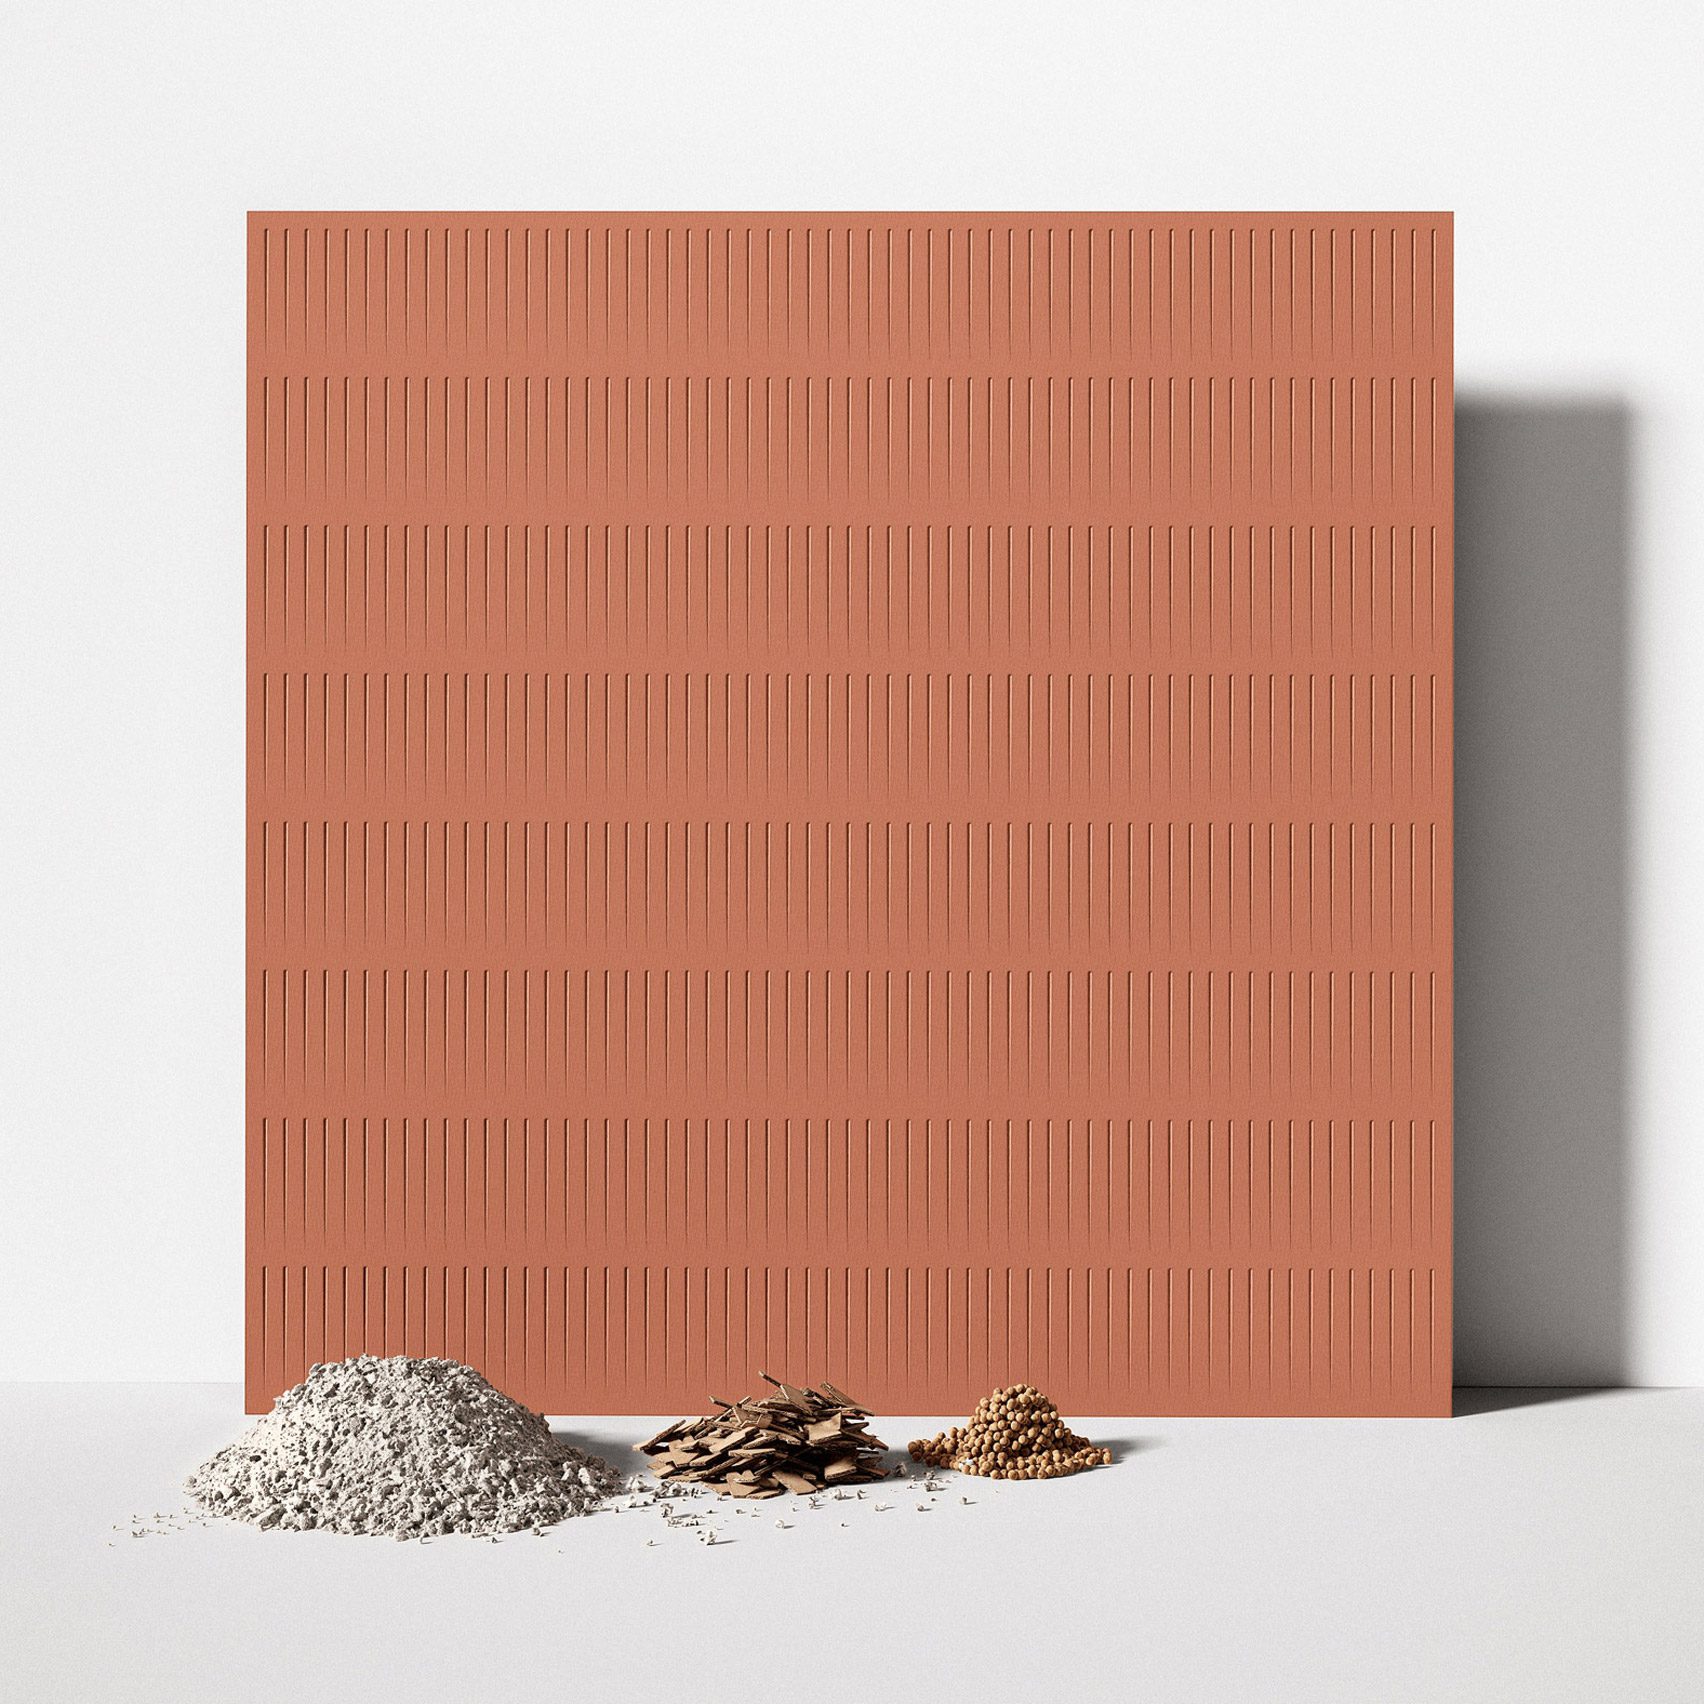 Alted H01 tile by Berta Julià Sala for Alted Materials